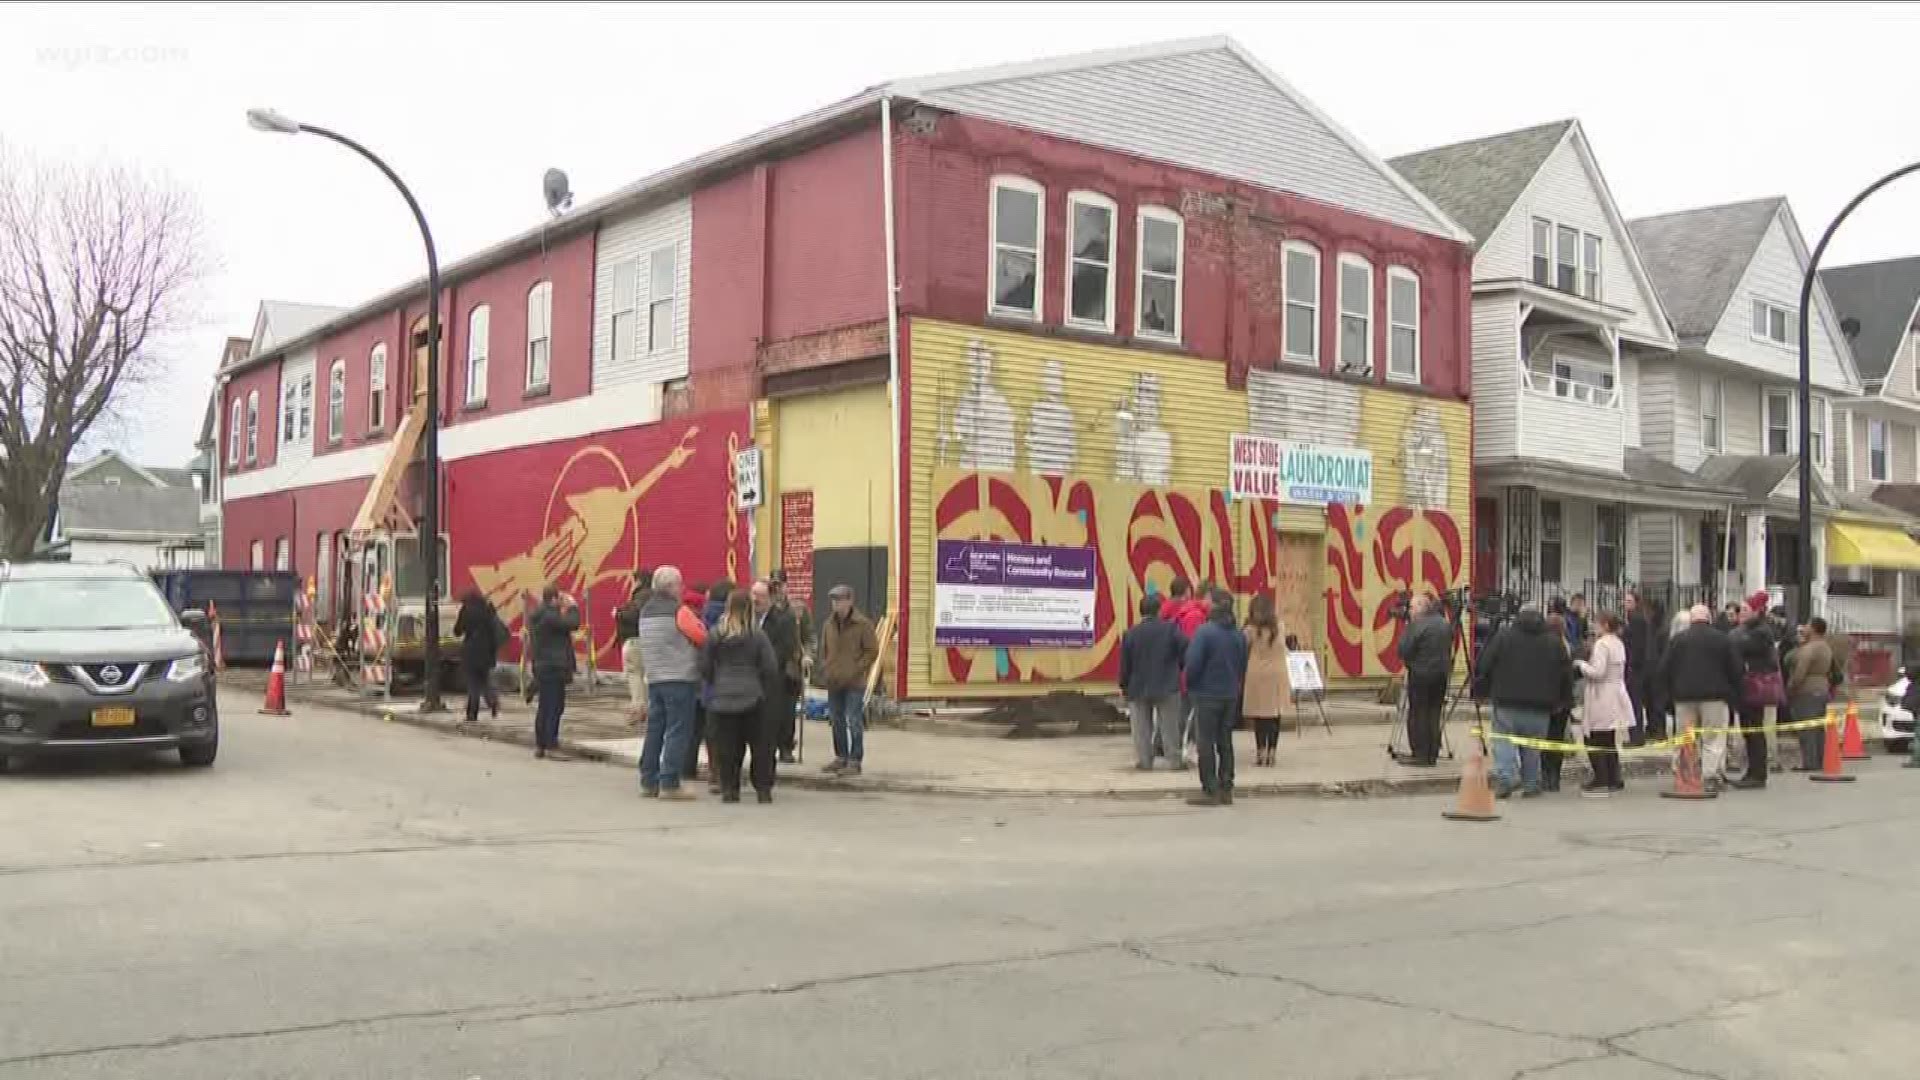 State officials have announced the start of work on a new $2.3 million affordable housing project on Buffalo's west side.